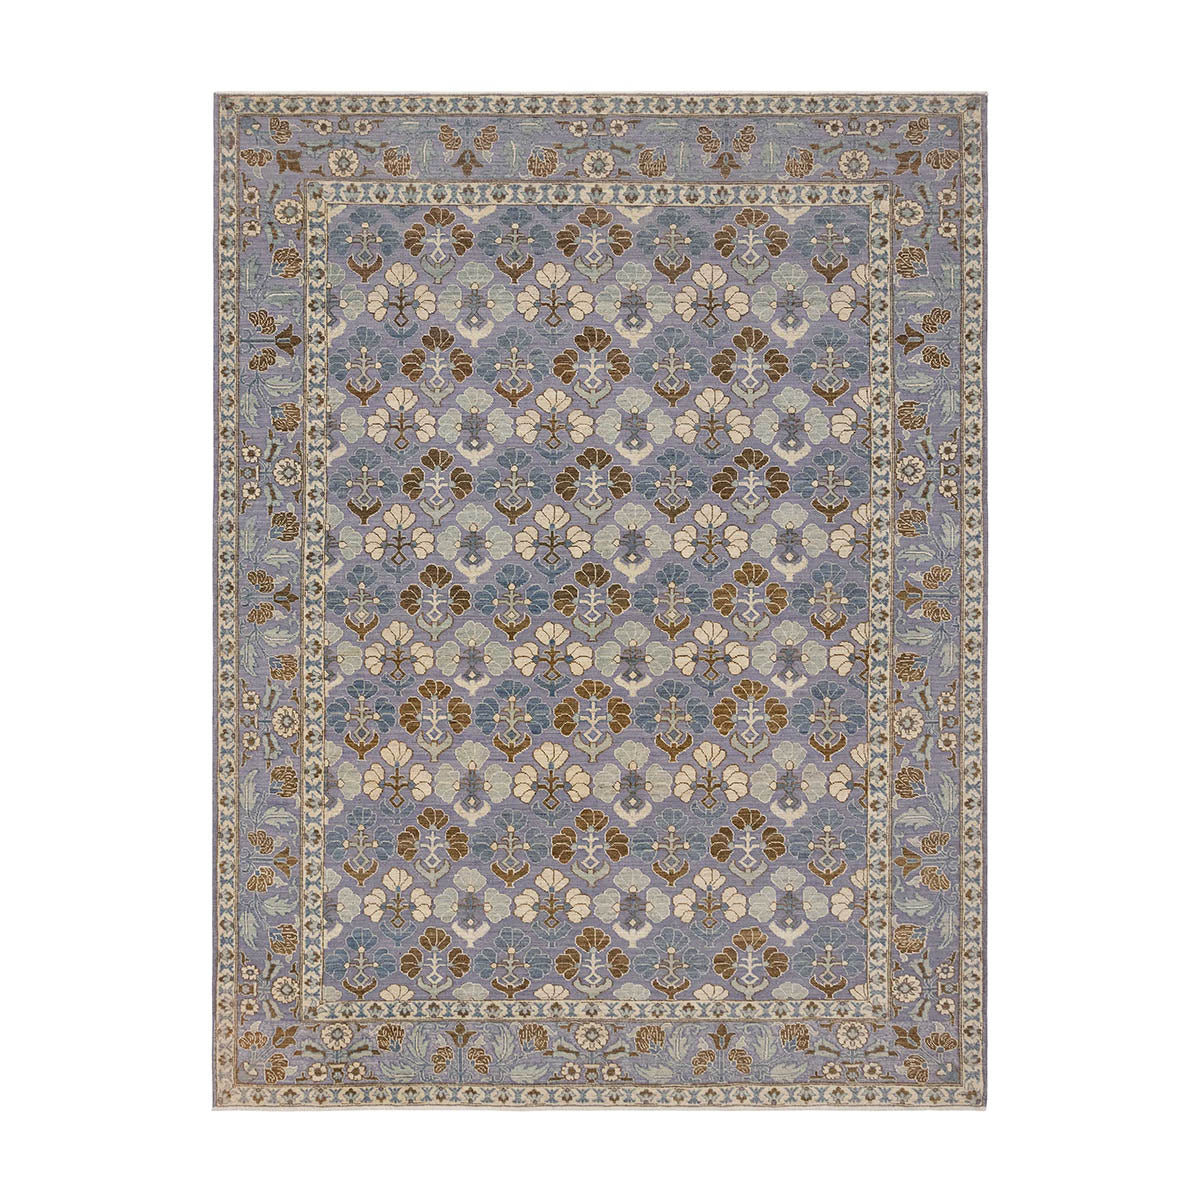 Amadi Carpets Afghan Decorative Rug Orchid Afternoon Light